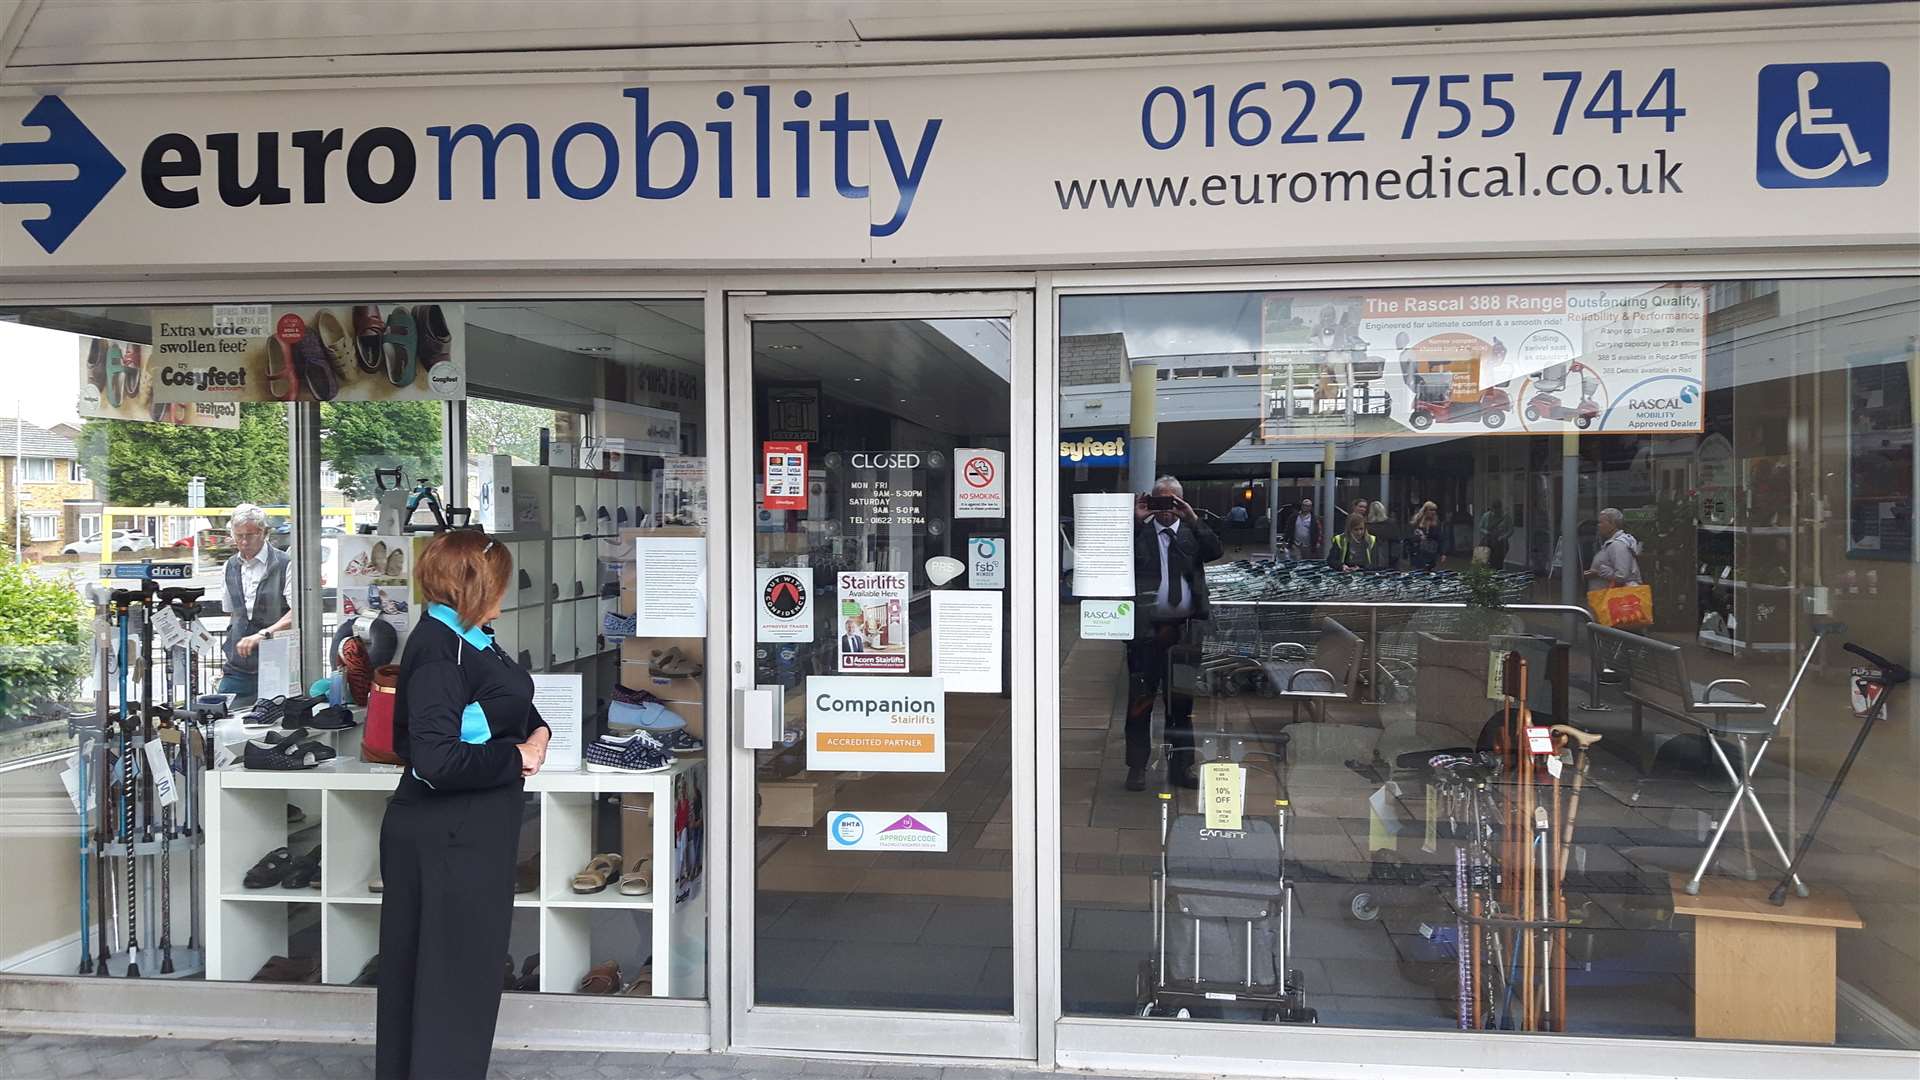 The Euromobility store has closed